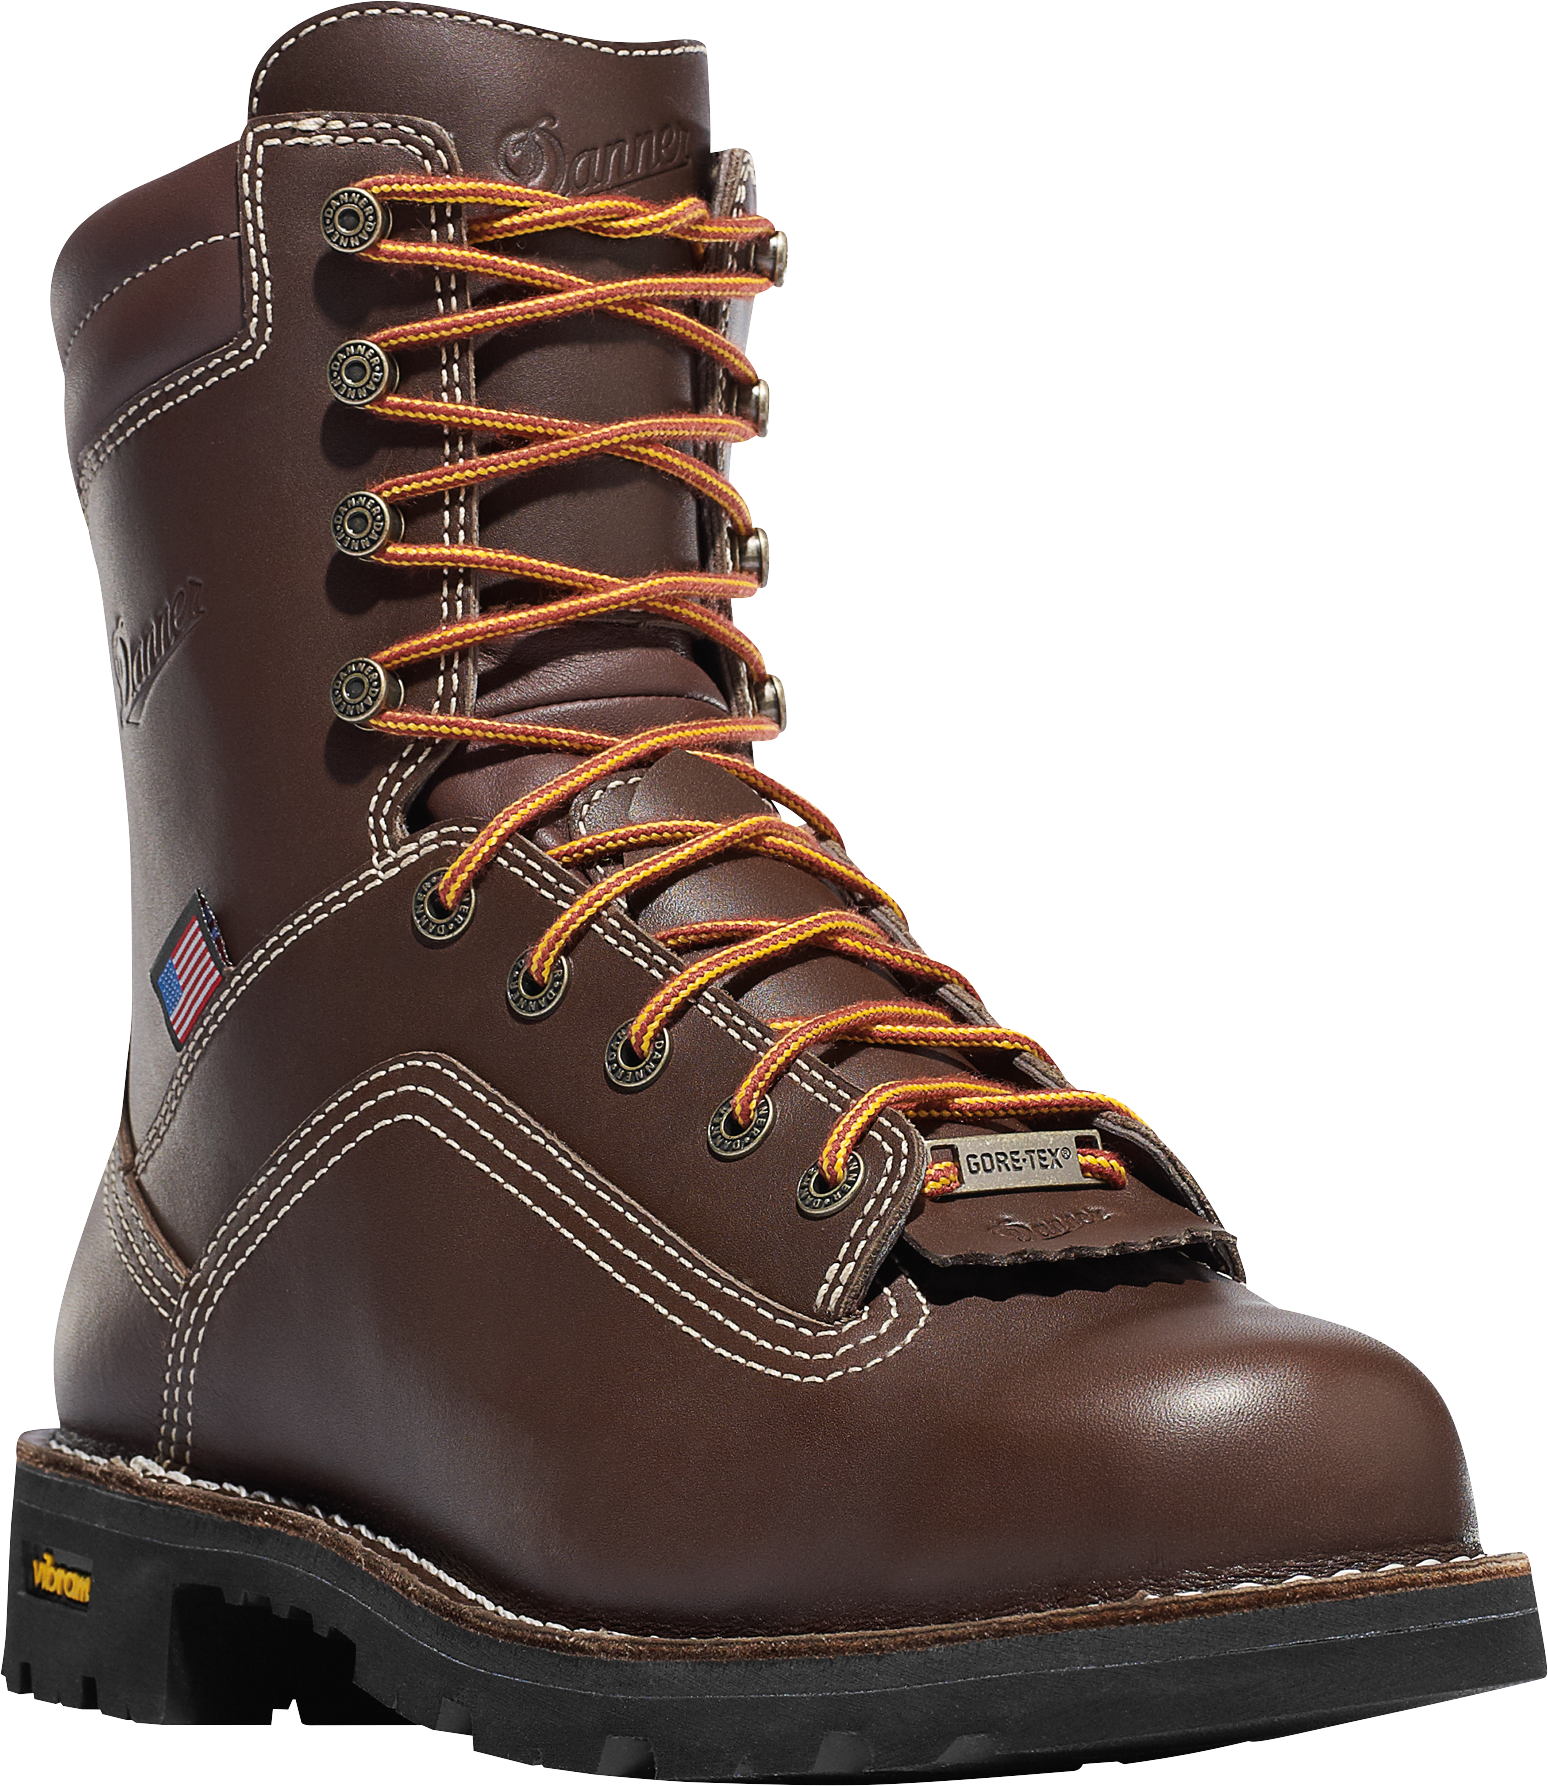 Danner Quarry USA Brown GORE-TEX Alloy Toe Work Boots for Men - Brown - 11.5M